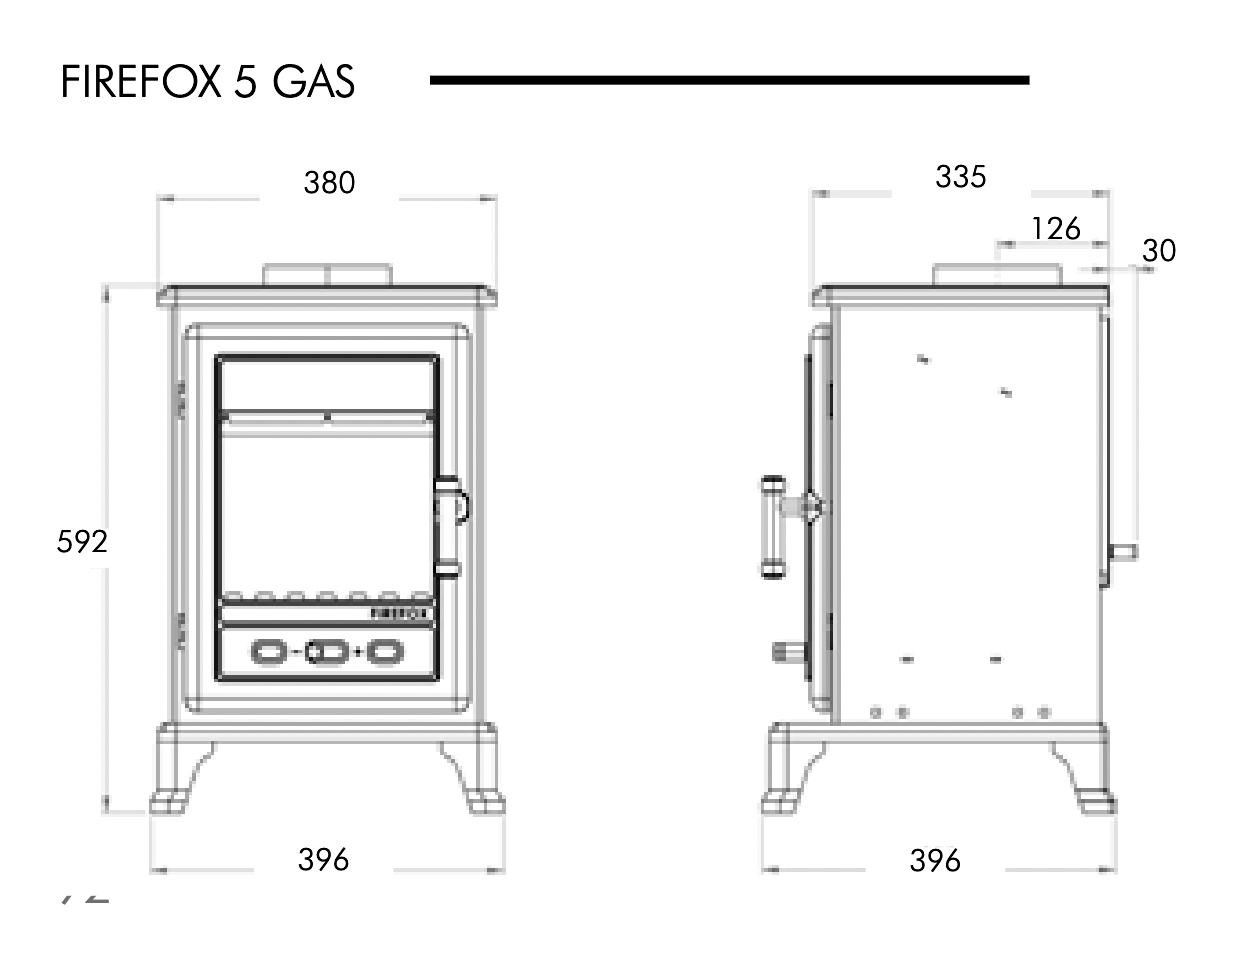 Firefox 5 Eco Gas Stove Dimensions